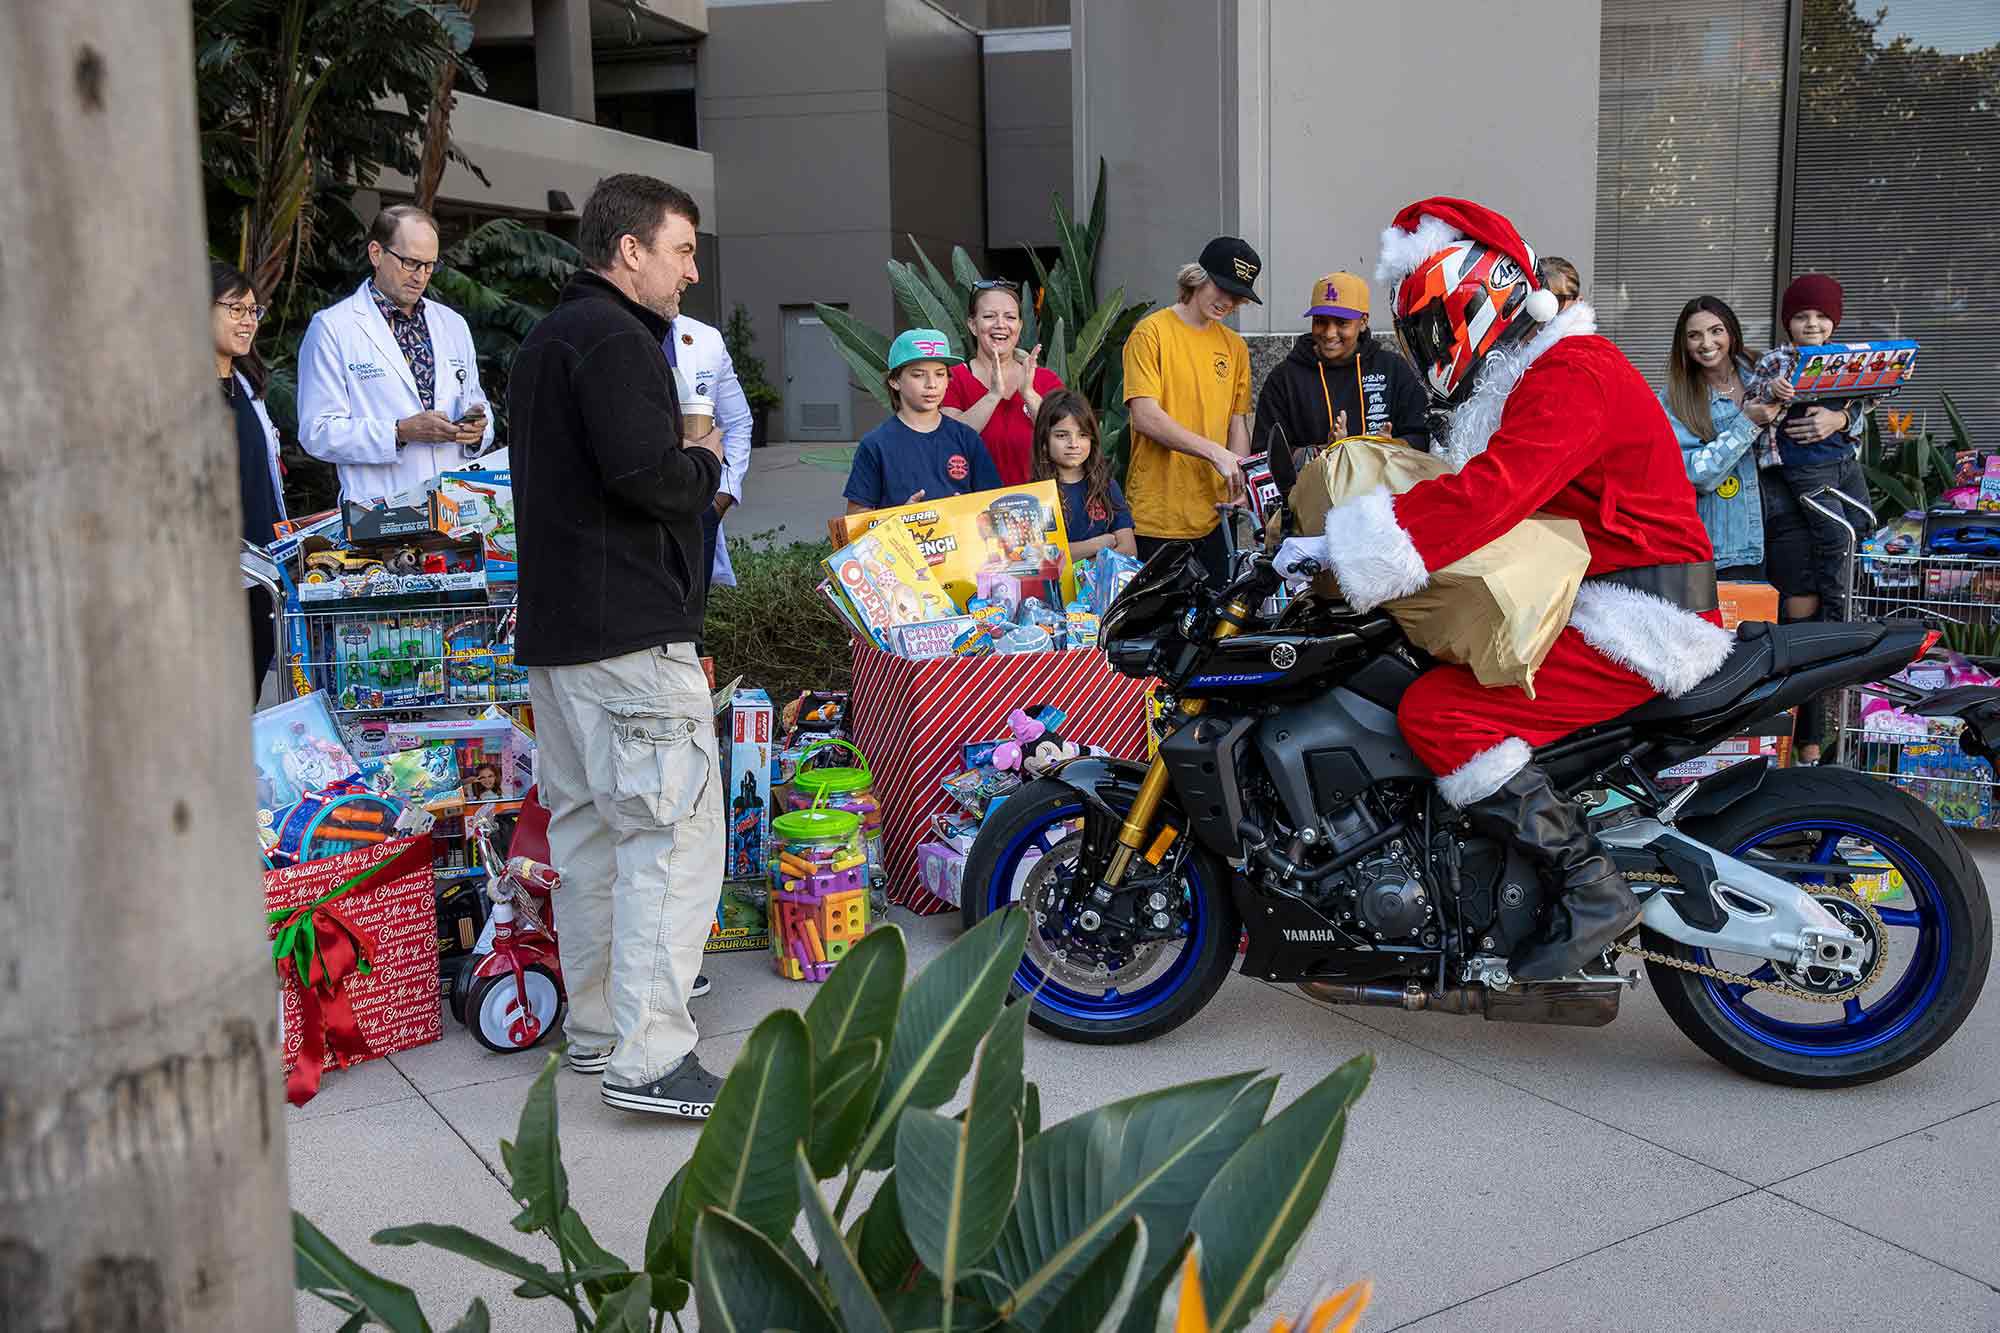 This season, Santa Claus rode to the Children's Hospital of Orange County. Each year this organization cares for upwards of 700,000 children.